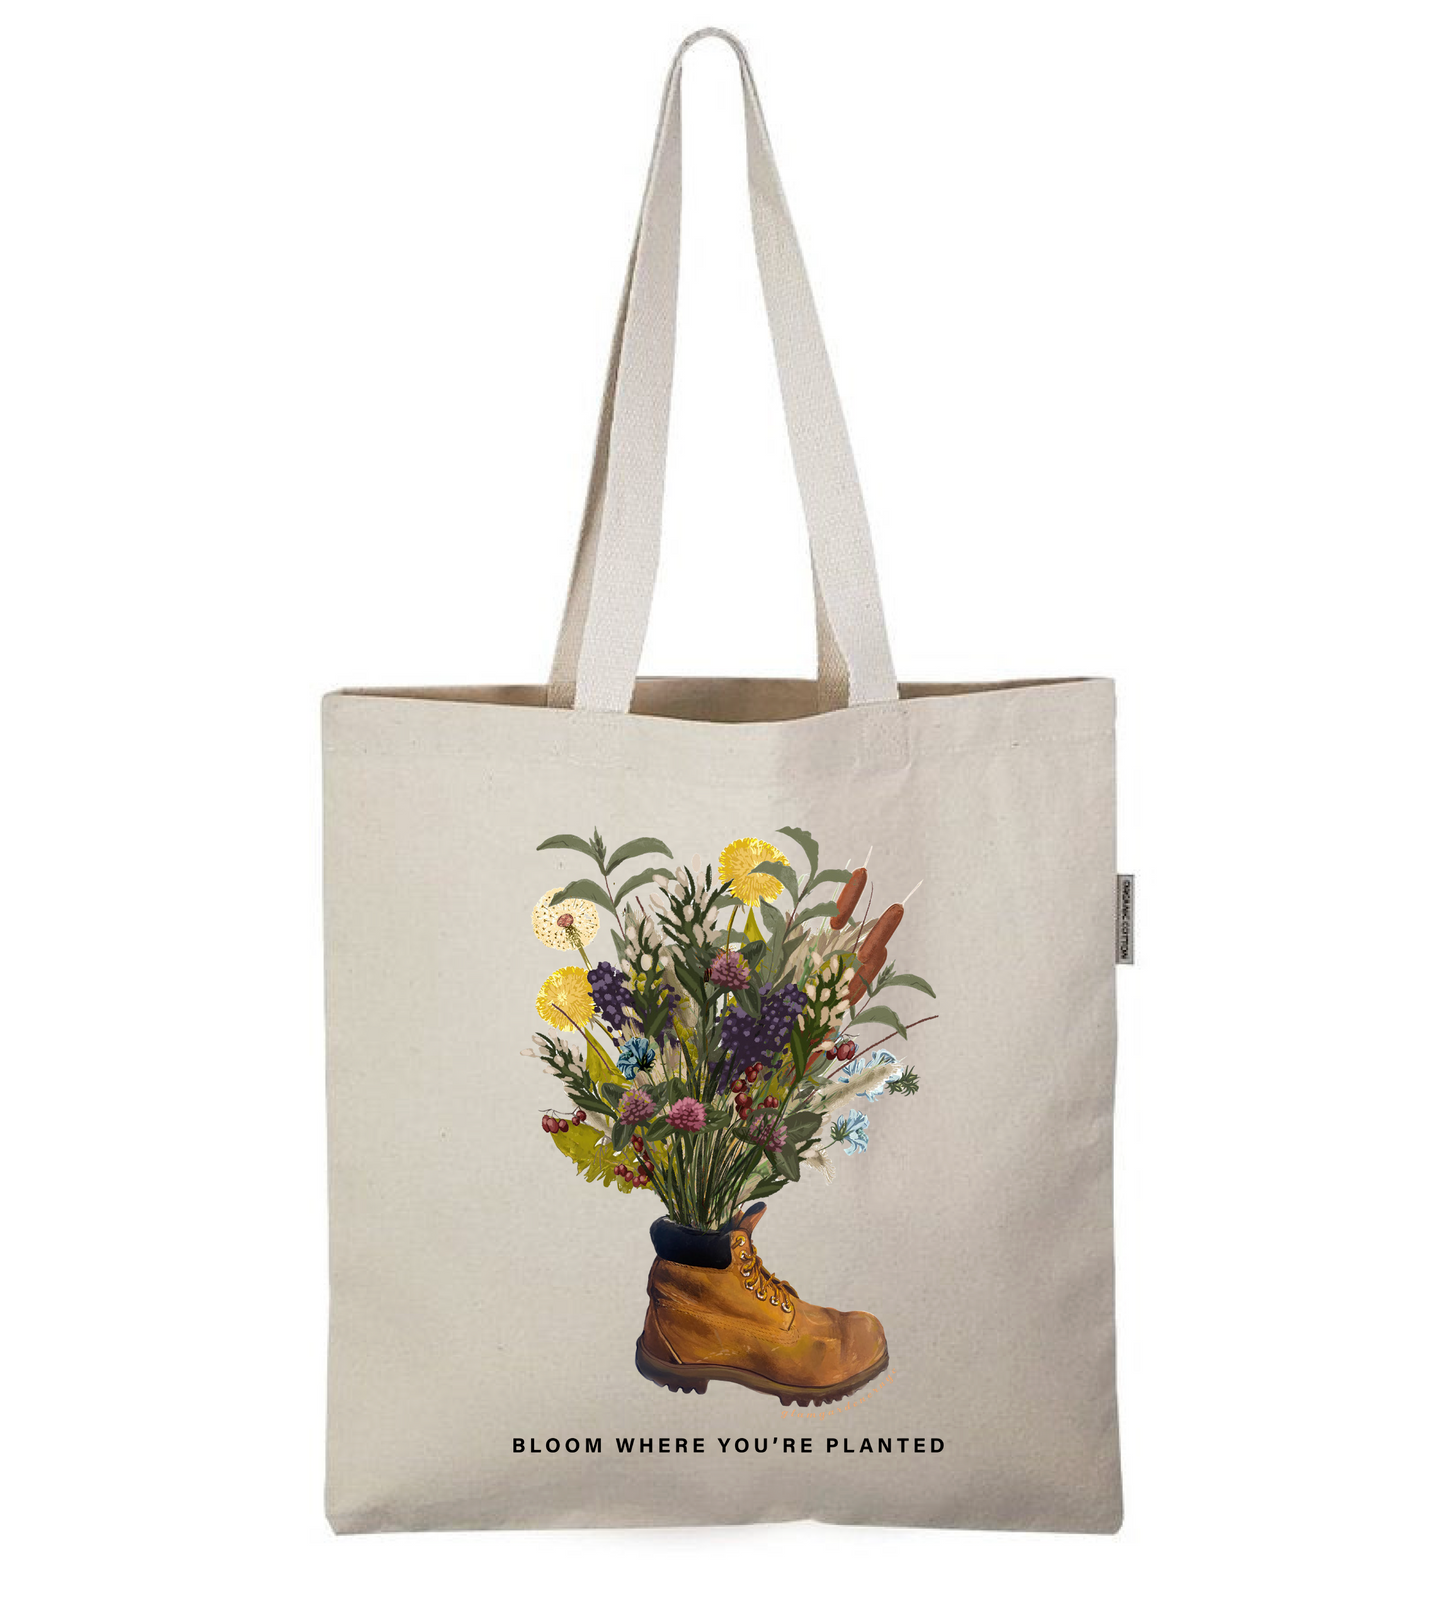 bloom where you're planted organic cotton tote bag